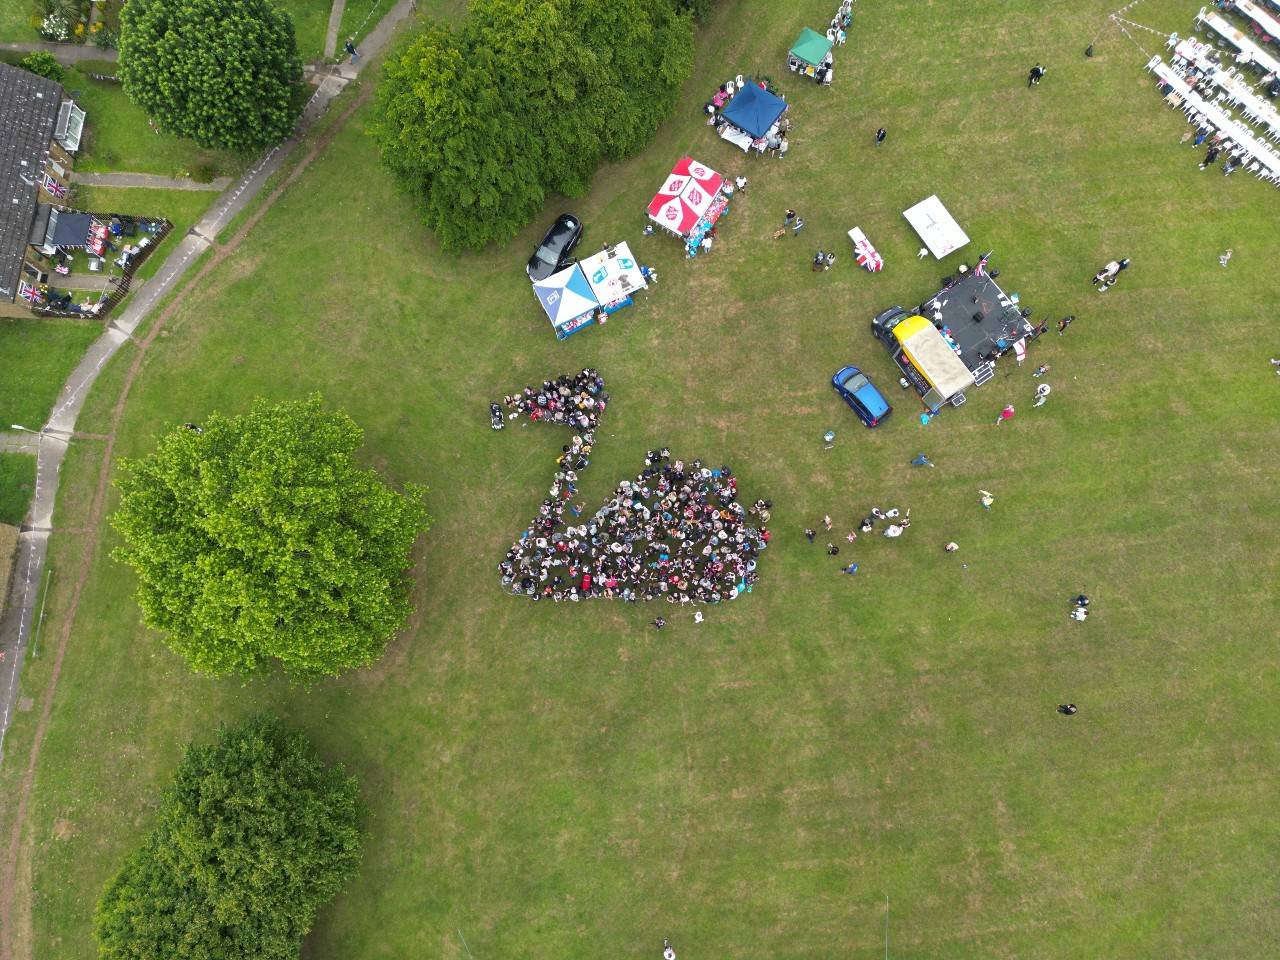 Group of people arranged together so the photo from above shows a swan.